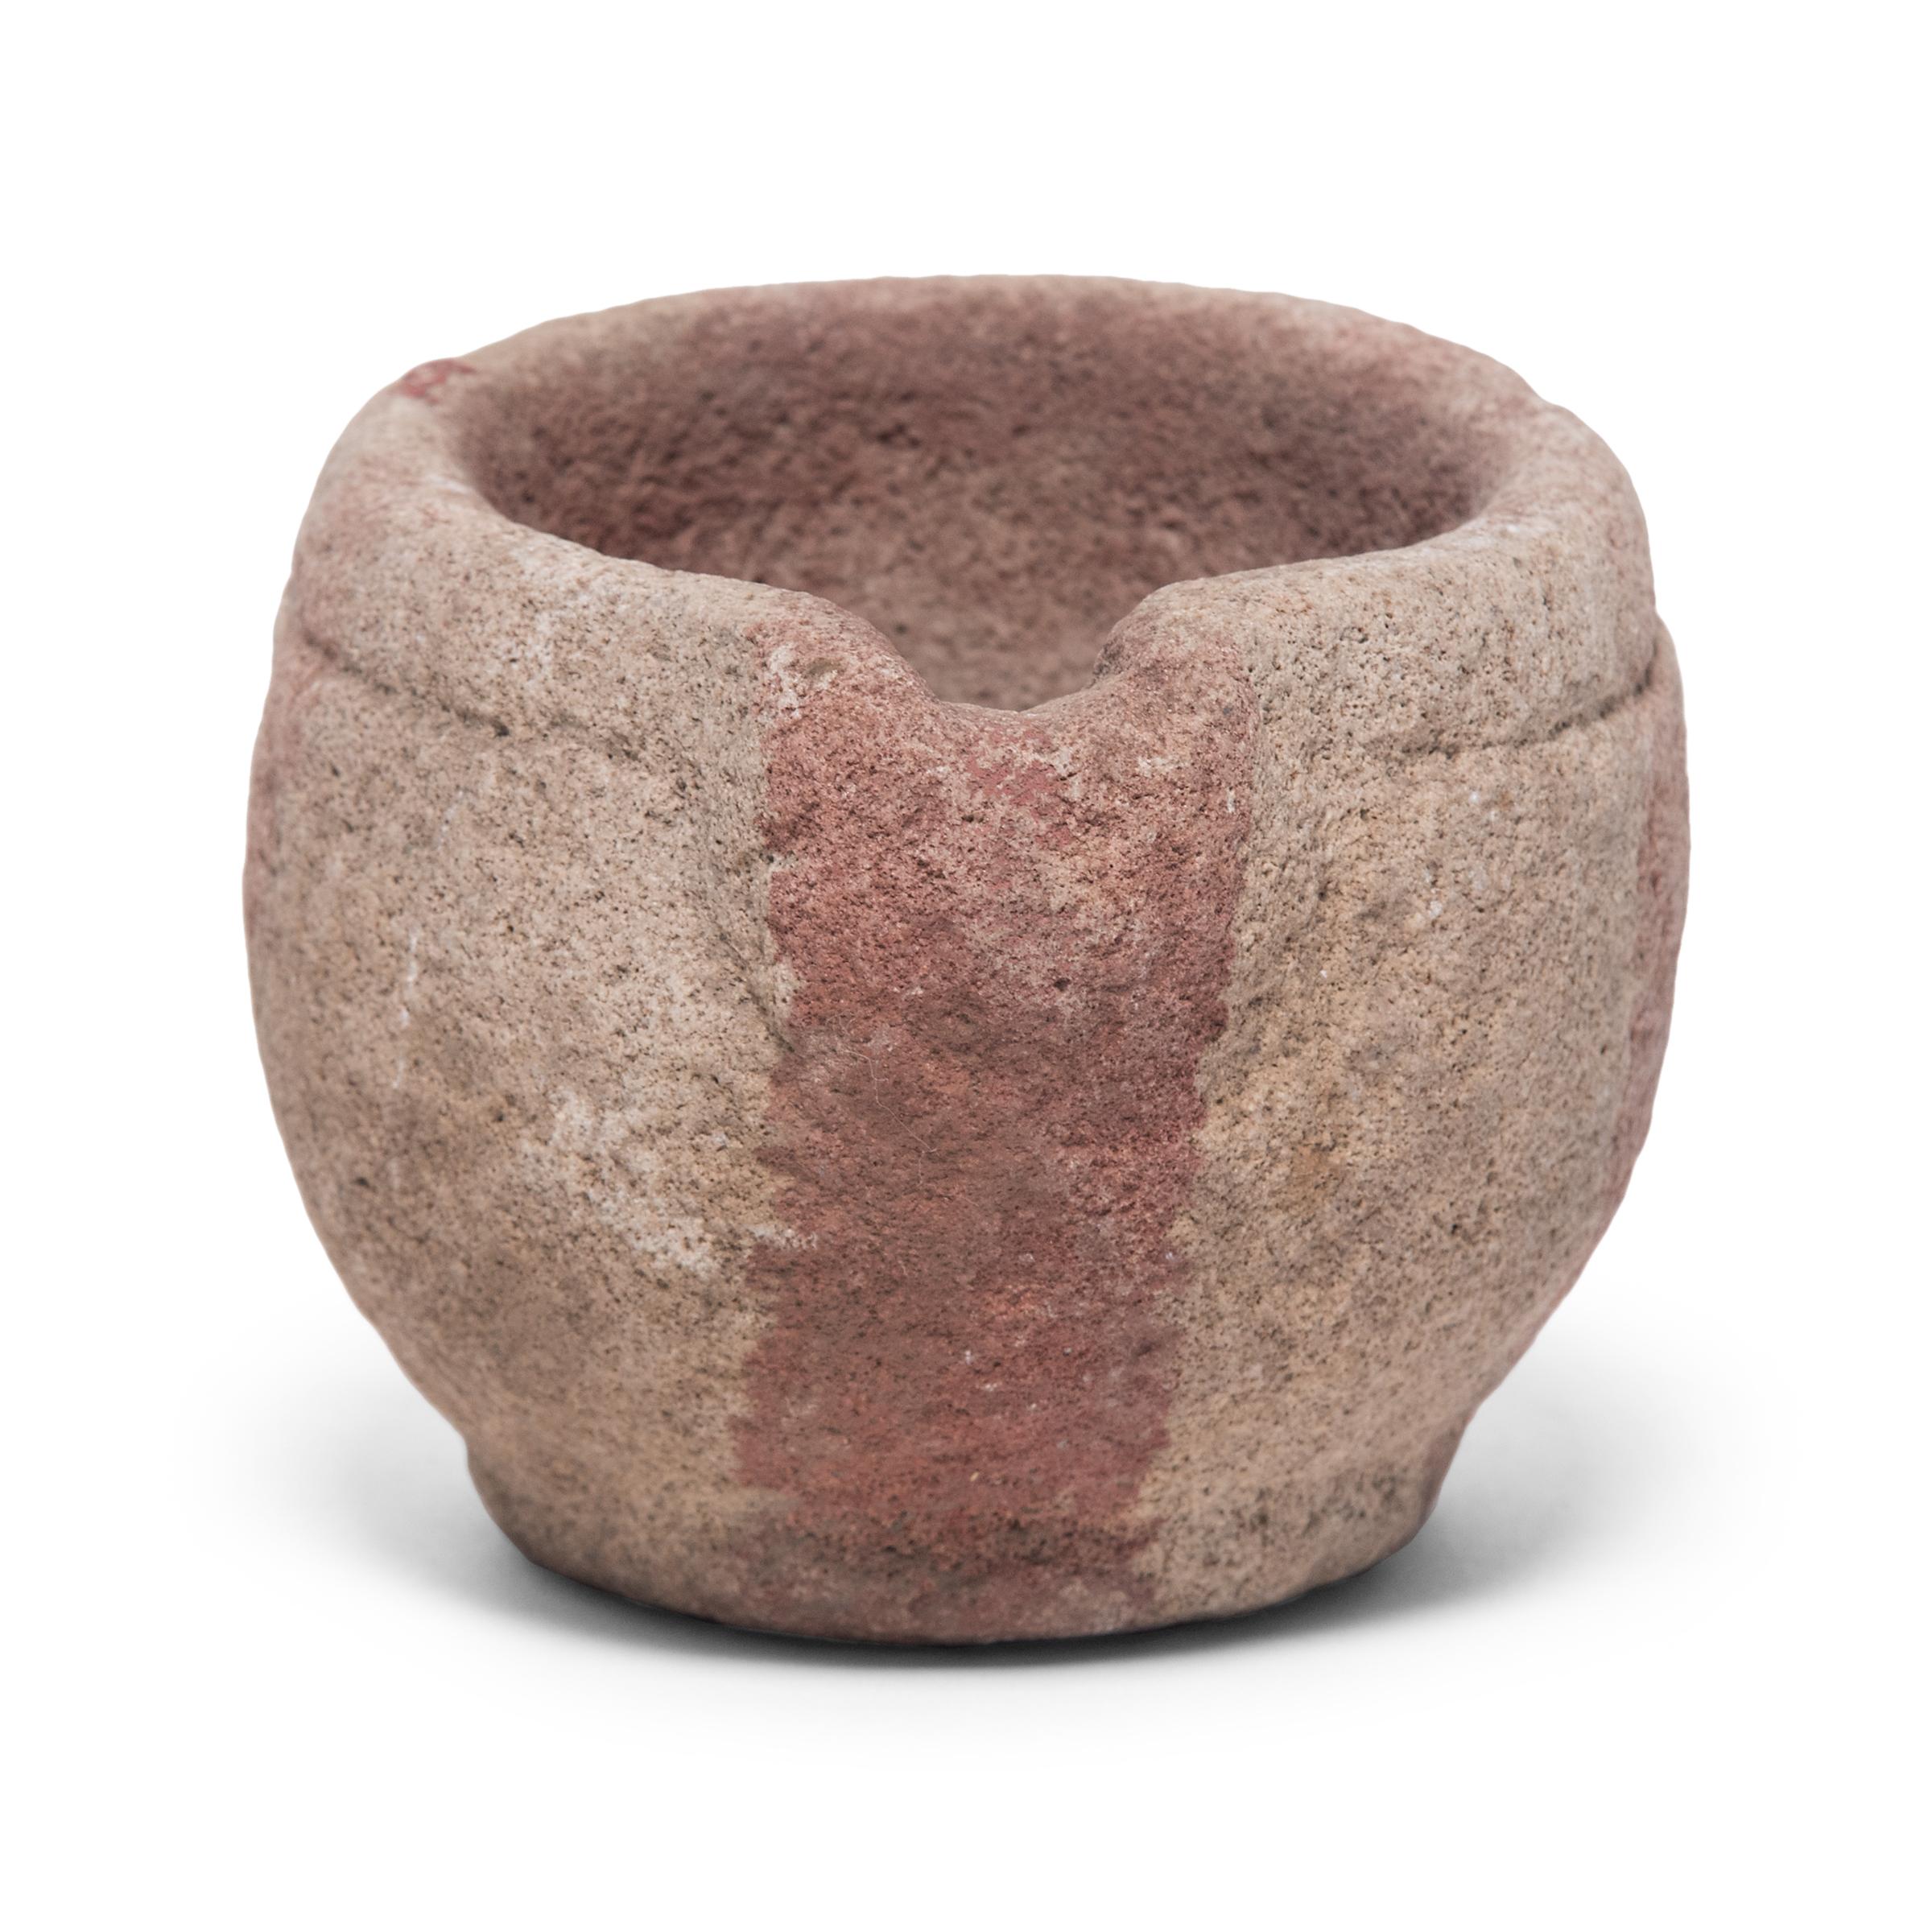 Hand carved from a single block of limestone, this round stone vessel is an early 20th century mortar once used daily in a Provincial kitchen to grind herbs, spices, and other foods. Used as a decorative vessel or tabletop planter, the mortar's